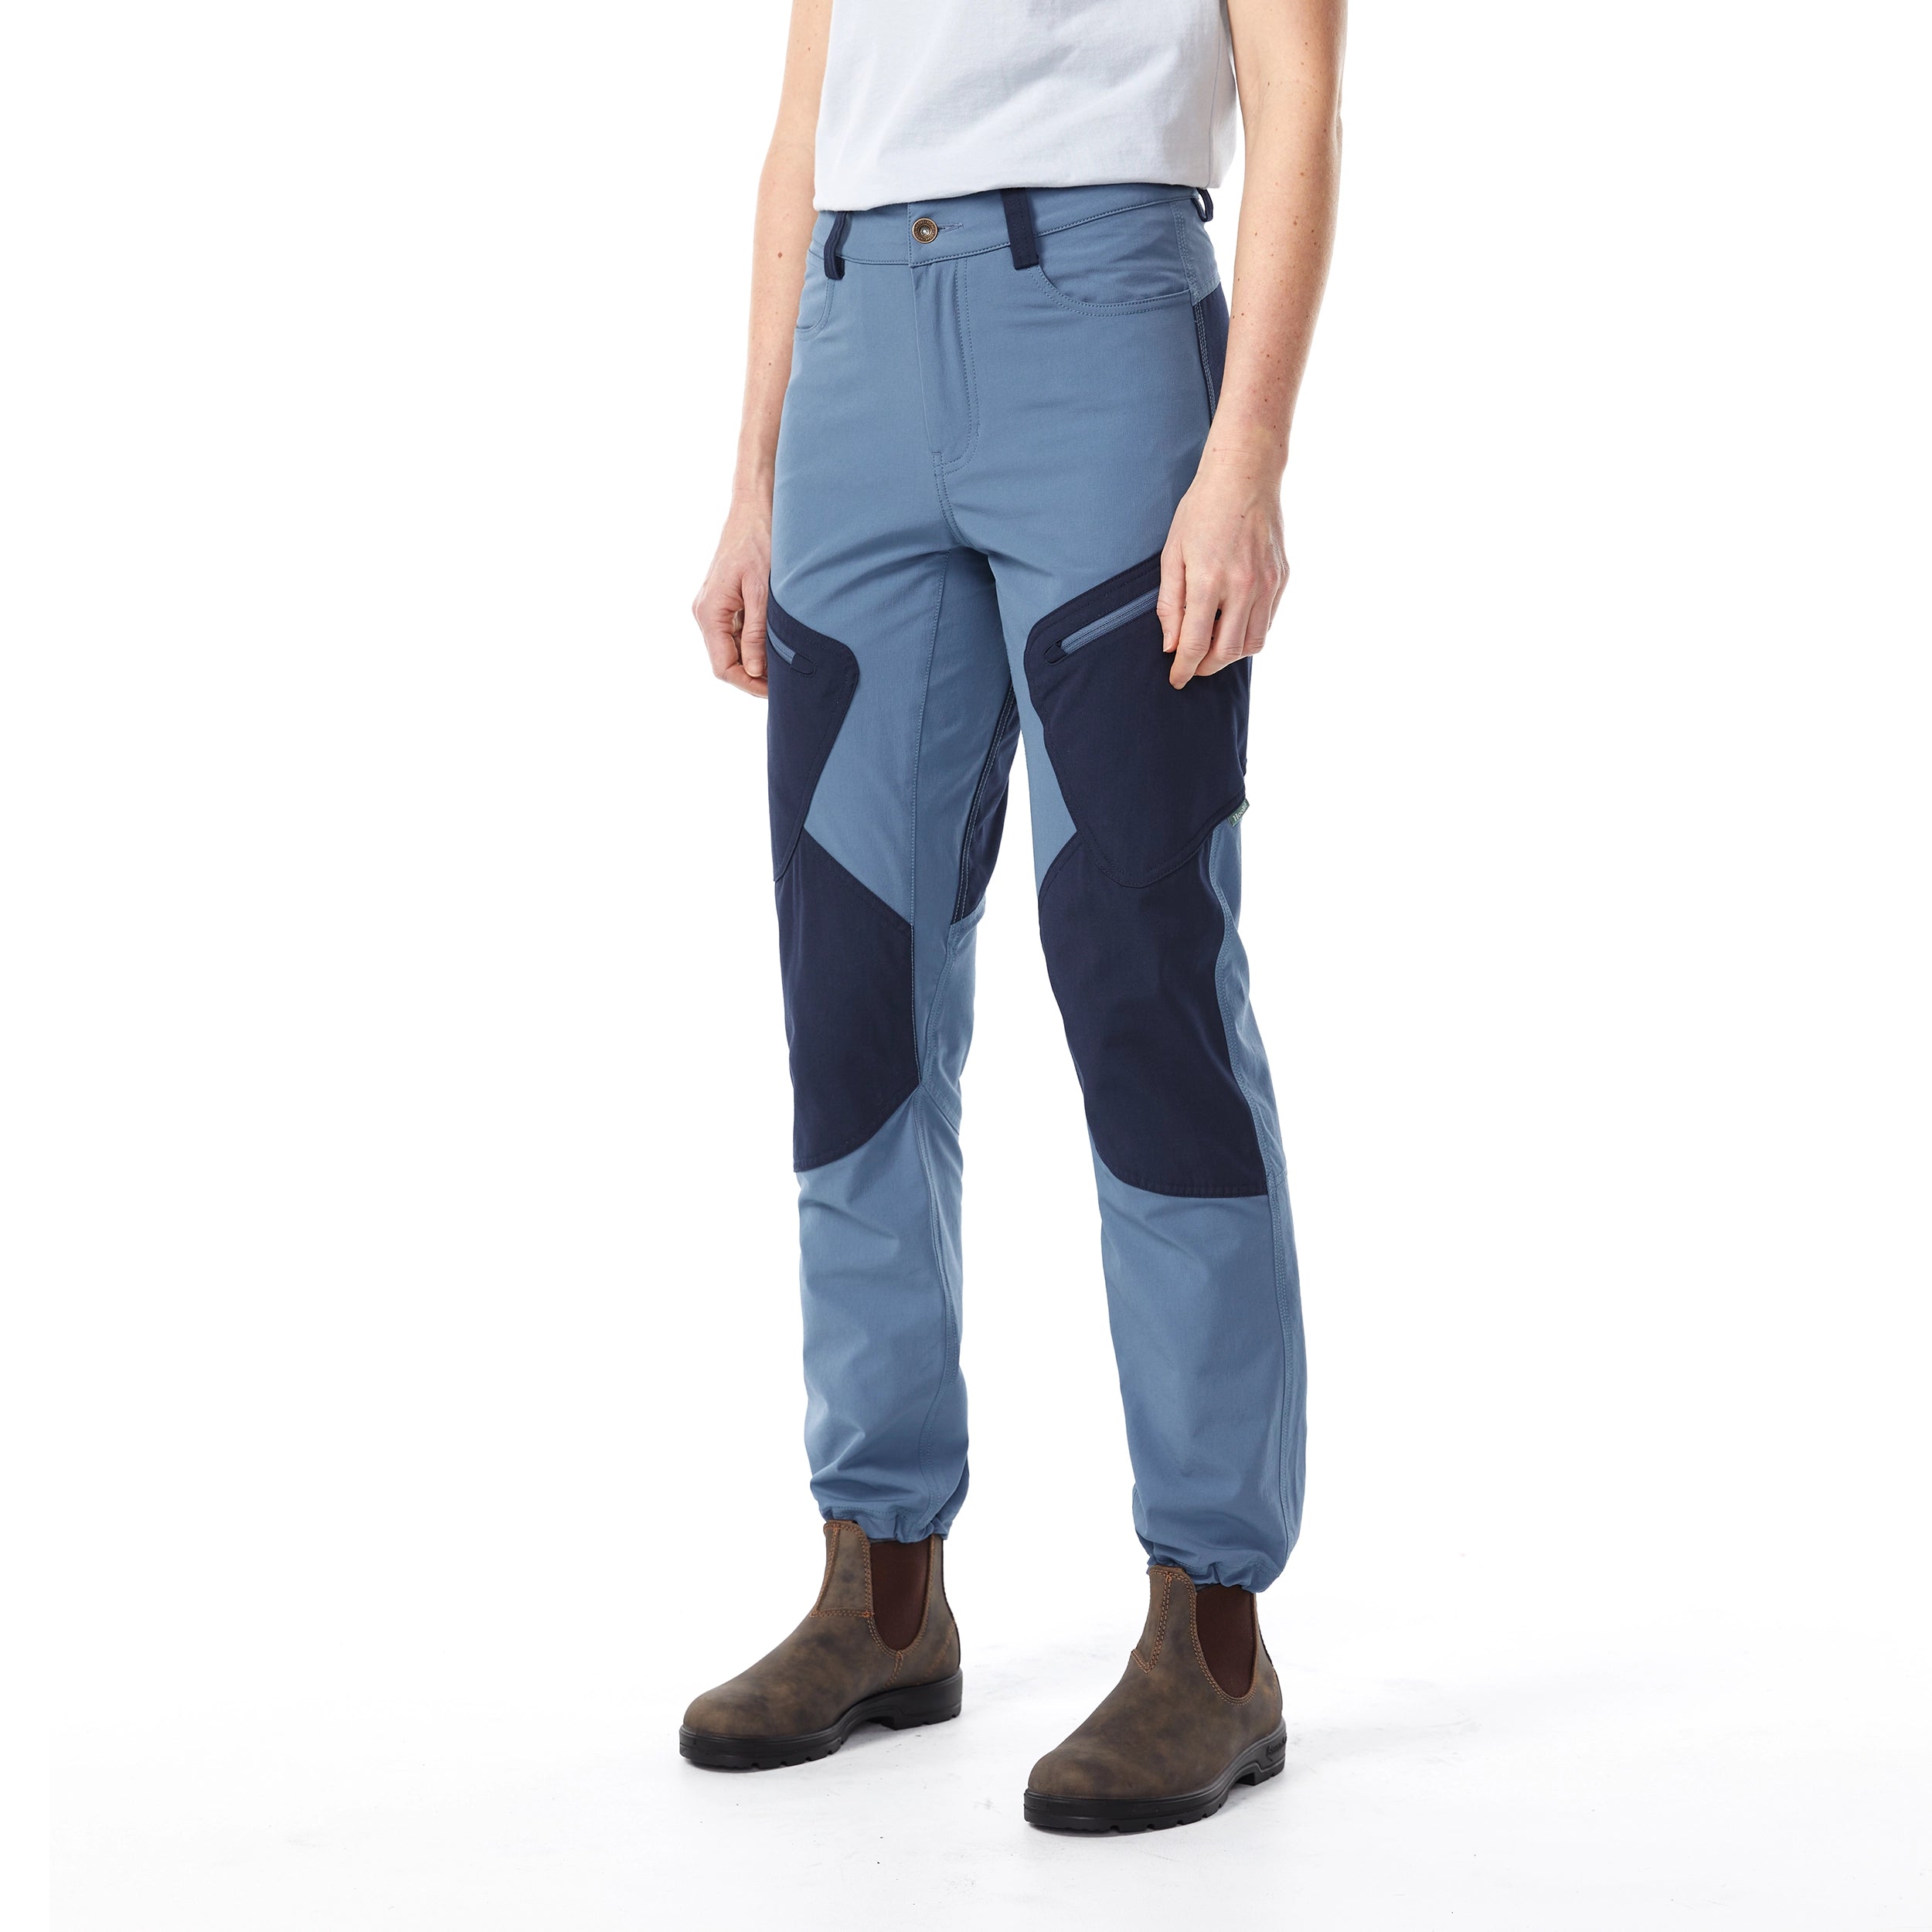 Stretch Jeans pants for Women for Climbing and trekking. Buy online.